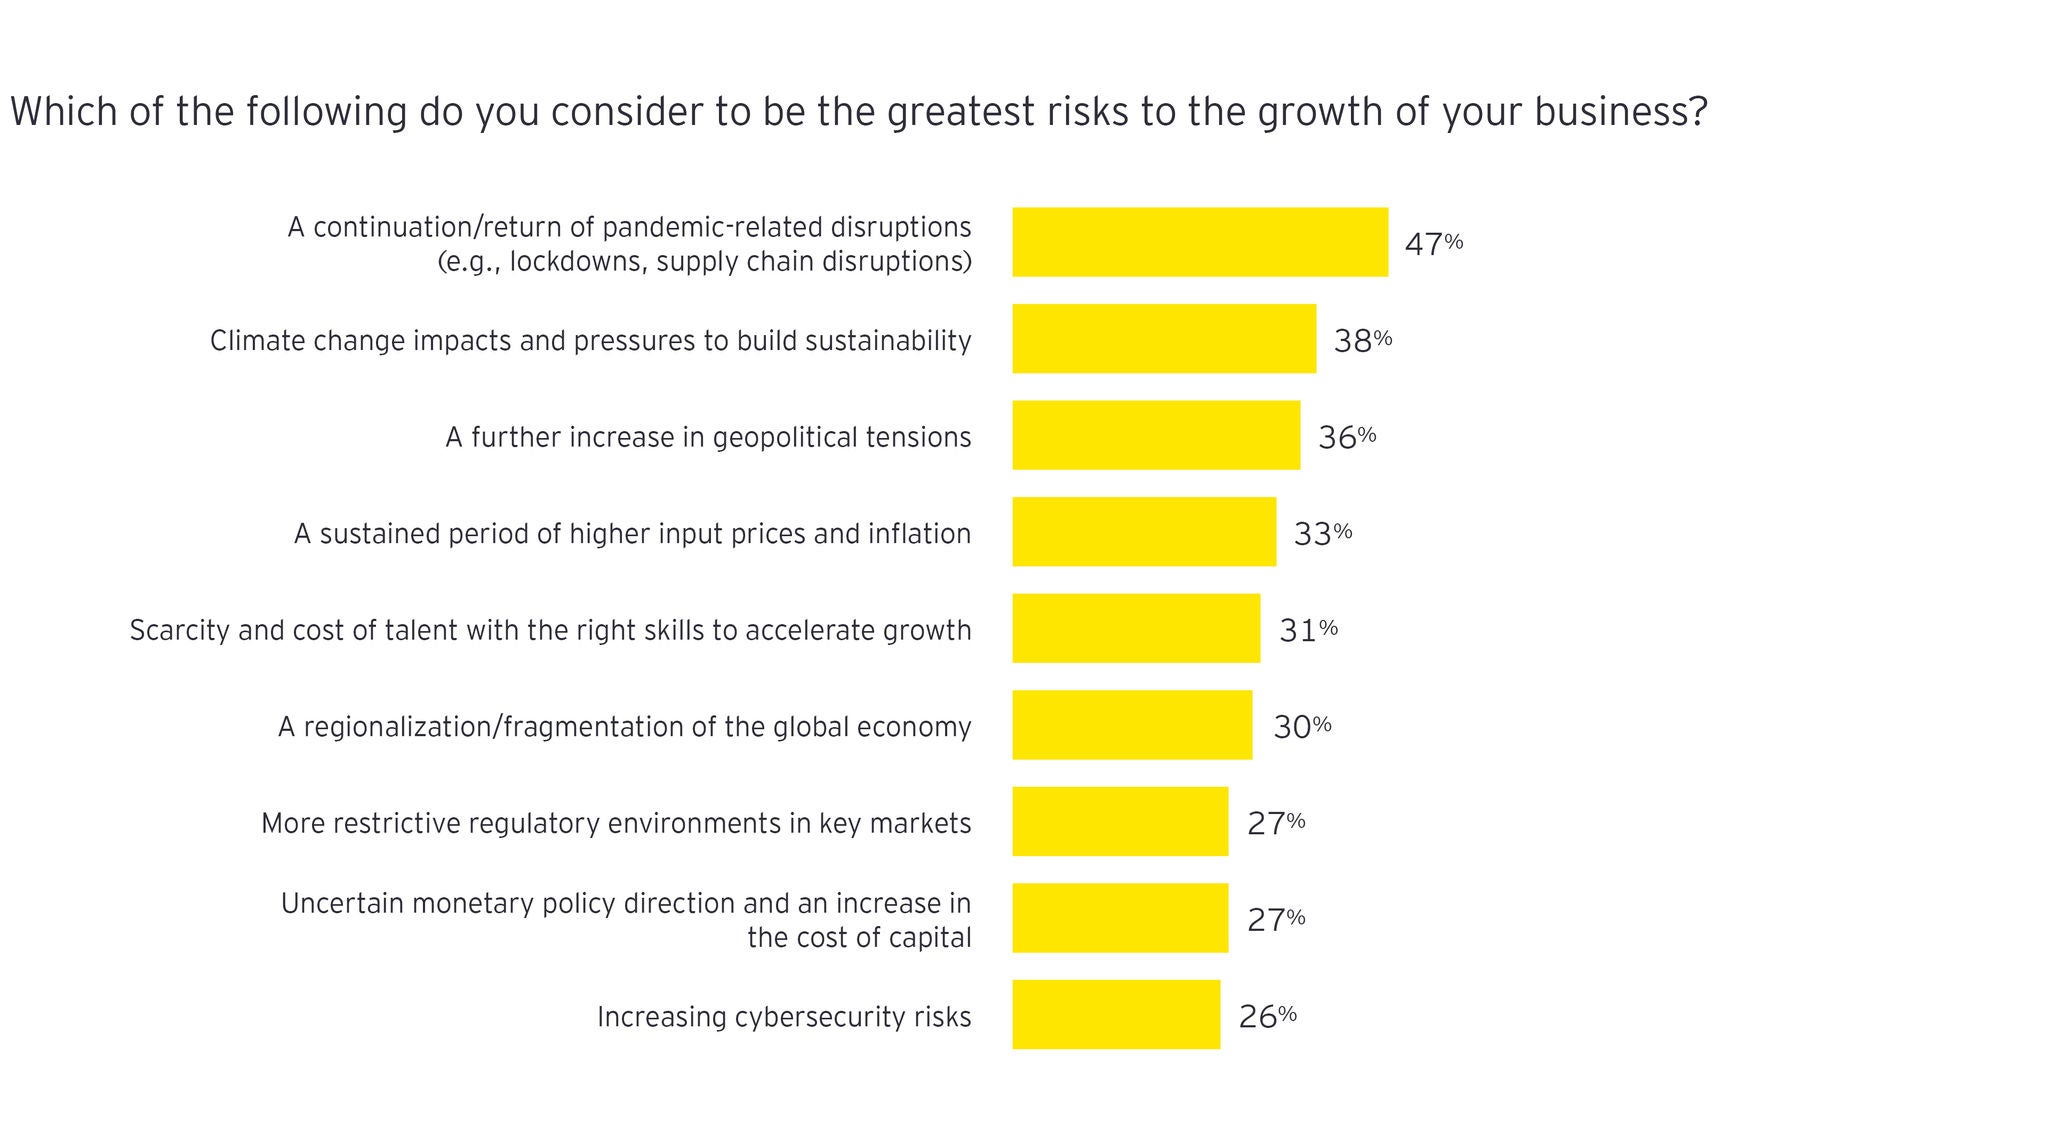 ey-greatest-risks-to-the-growth-of-your-business-graphic-3840